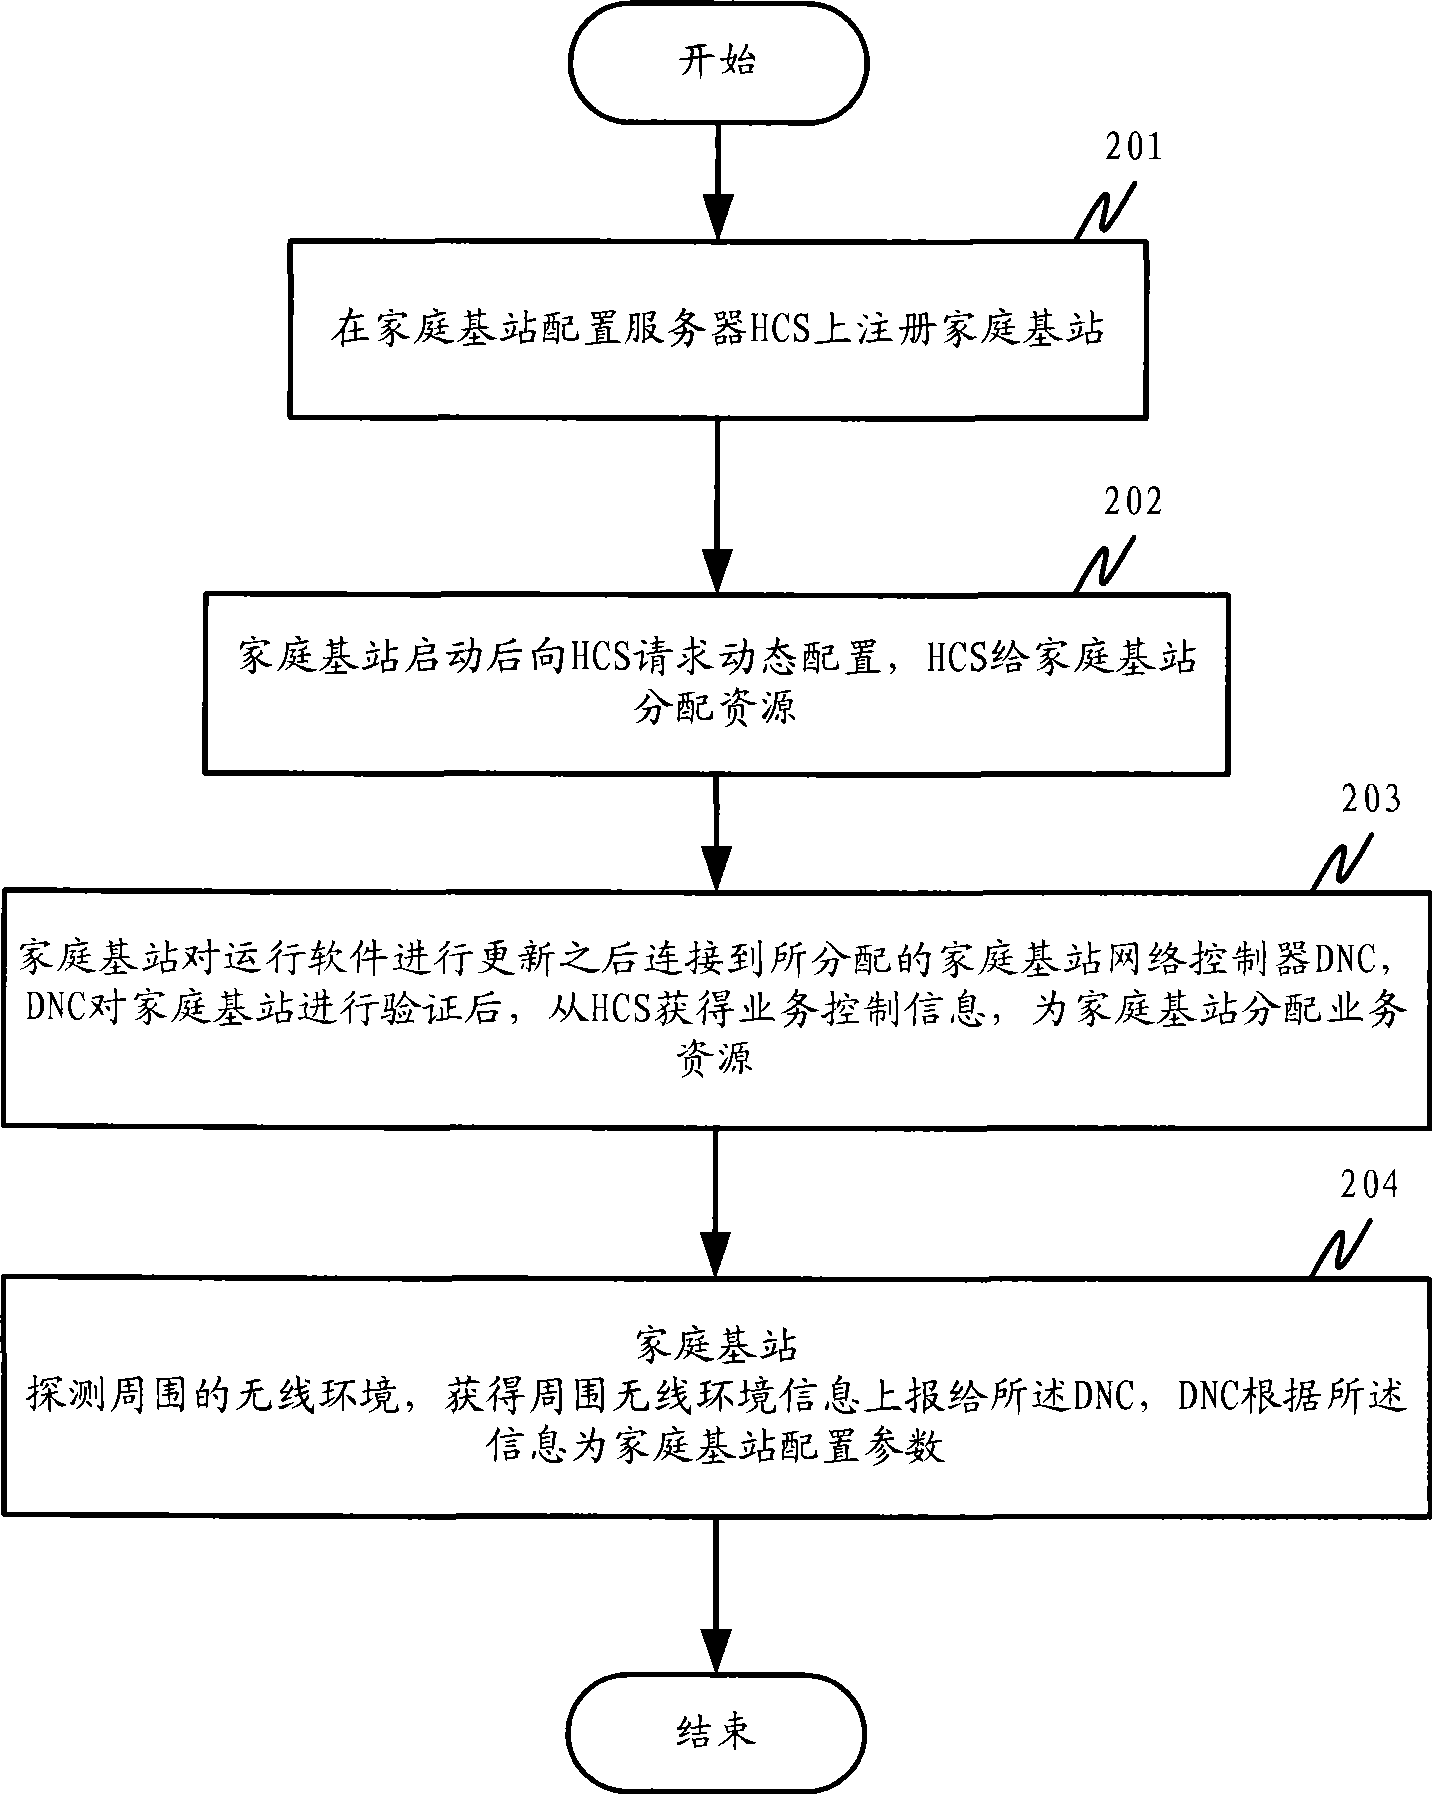 Automatic installation method for household base station